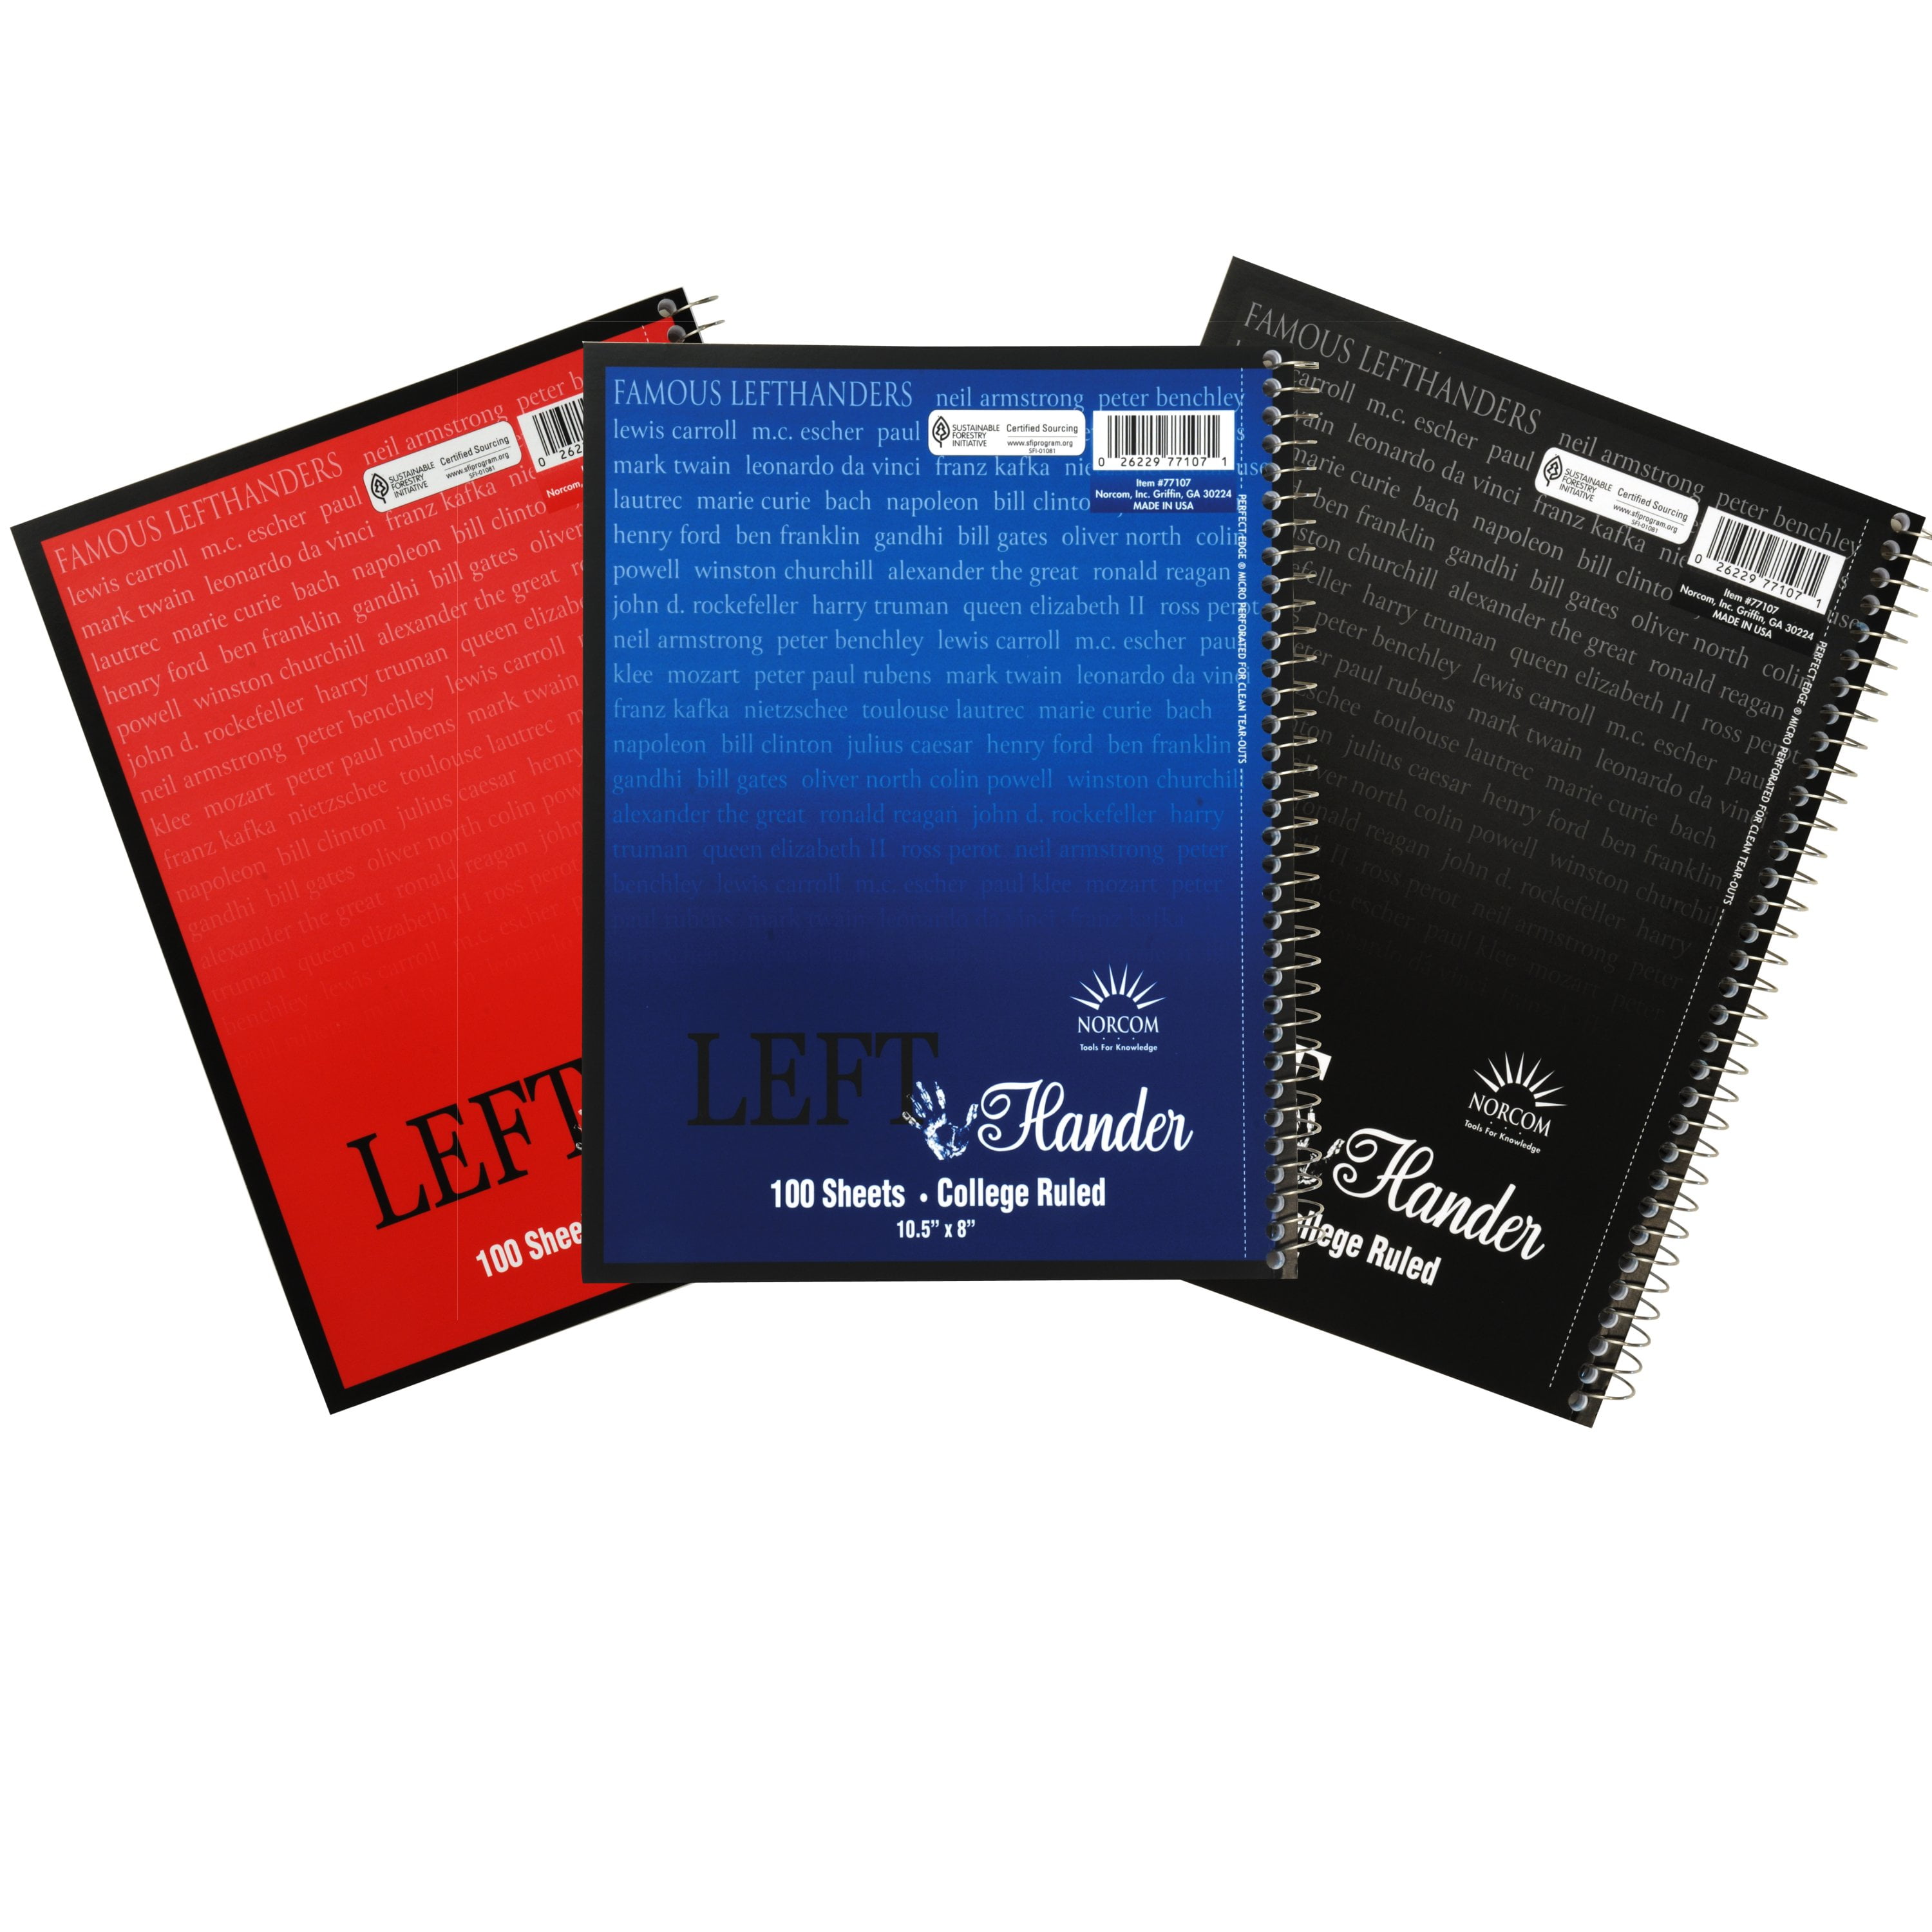 Lefty's The Left Hand Store 906326 3 Left Handed Wide Ruled Notebooks With  Mirrored Lefty, Assorted Colors